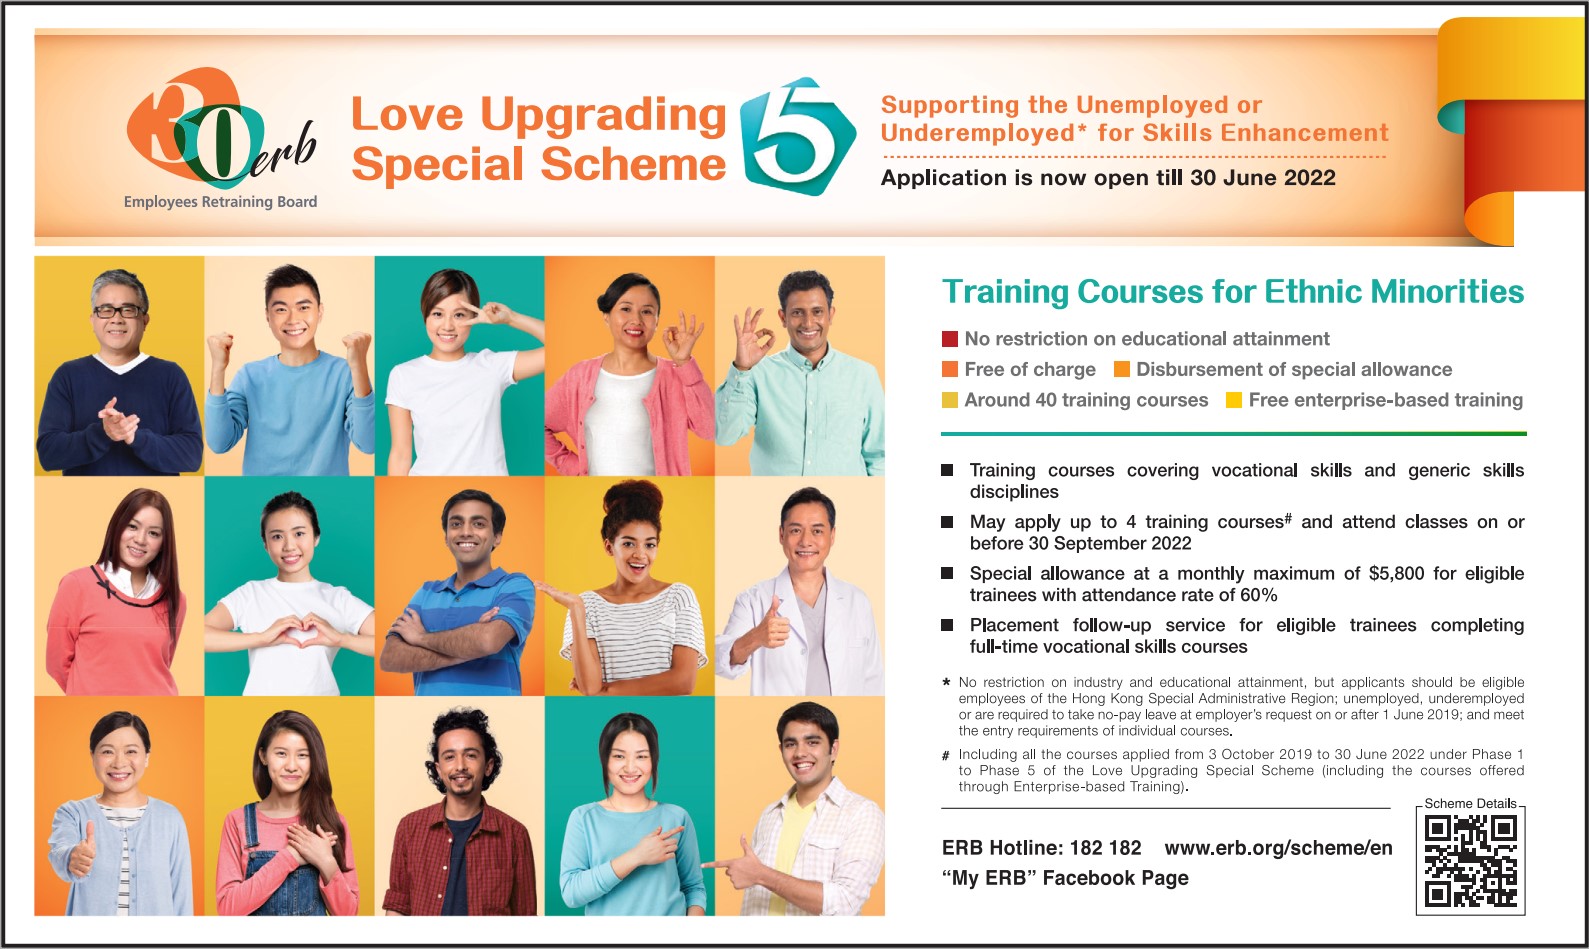 Click here to download the image version of newspaper advertisement of Love Upgrading Special Scheme 5 (May 2022)